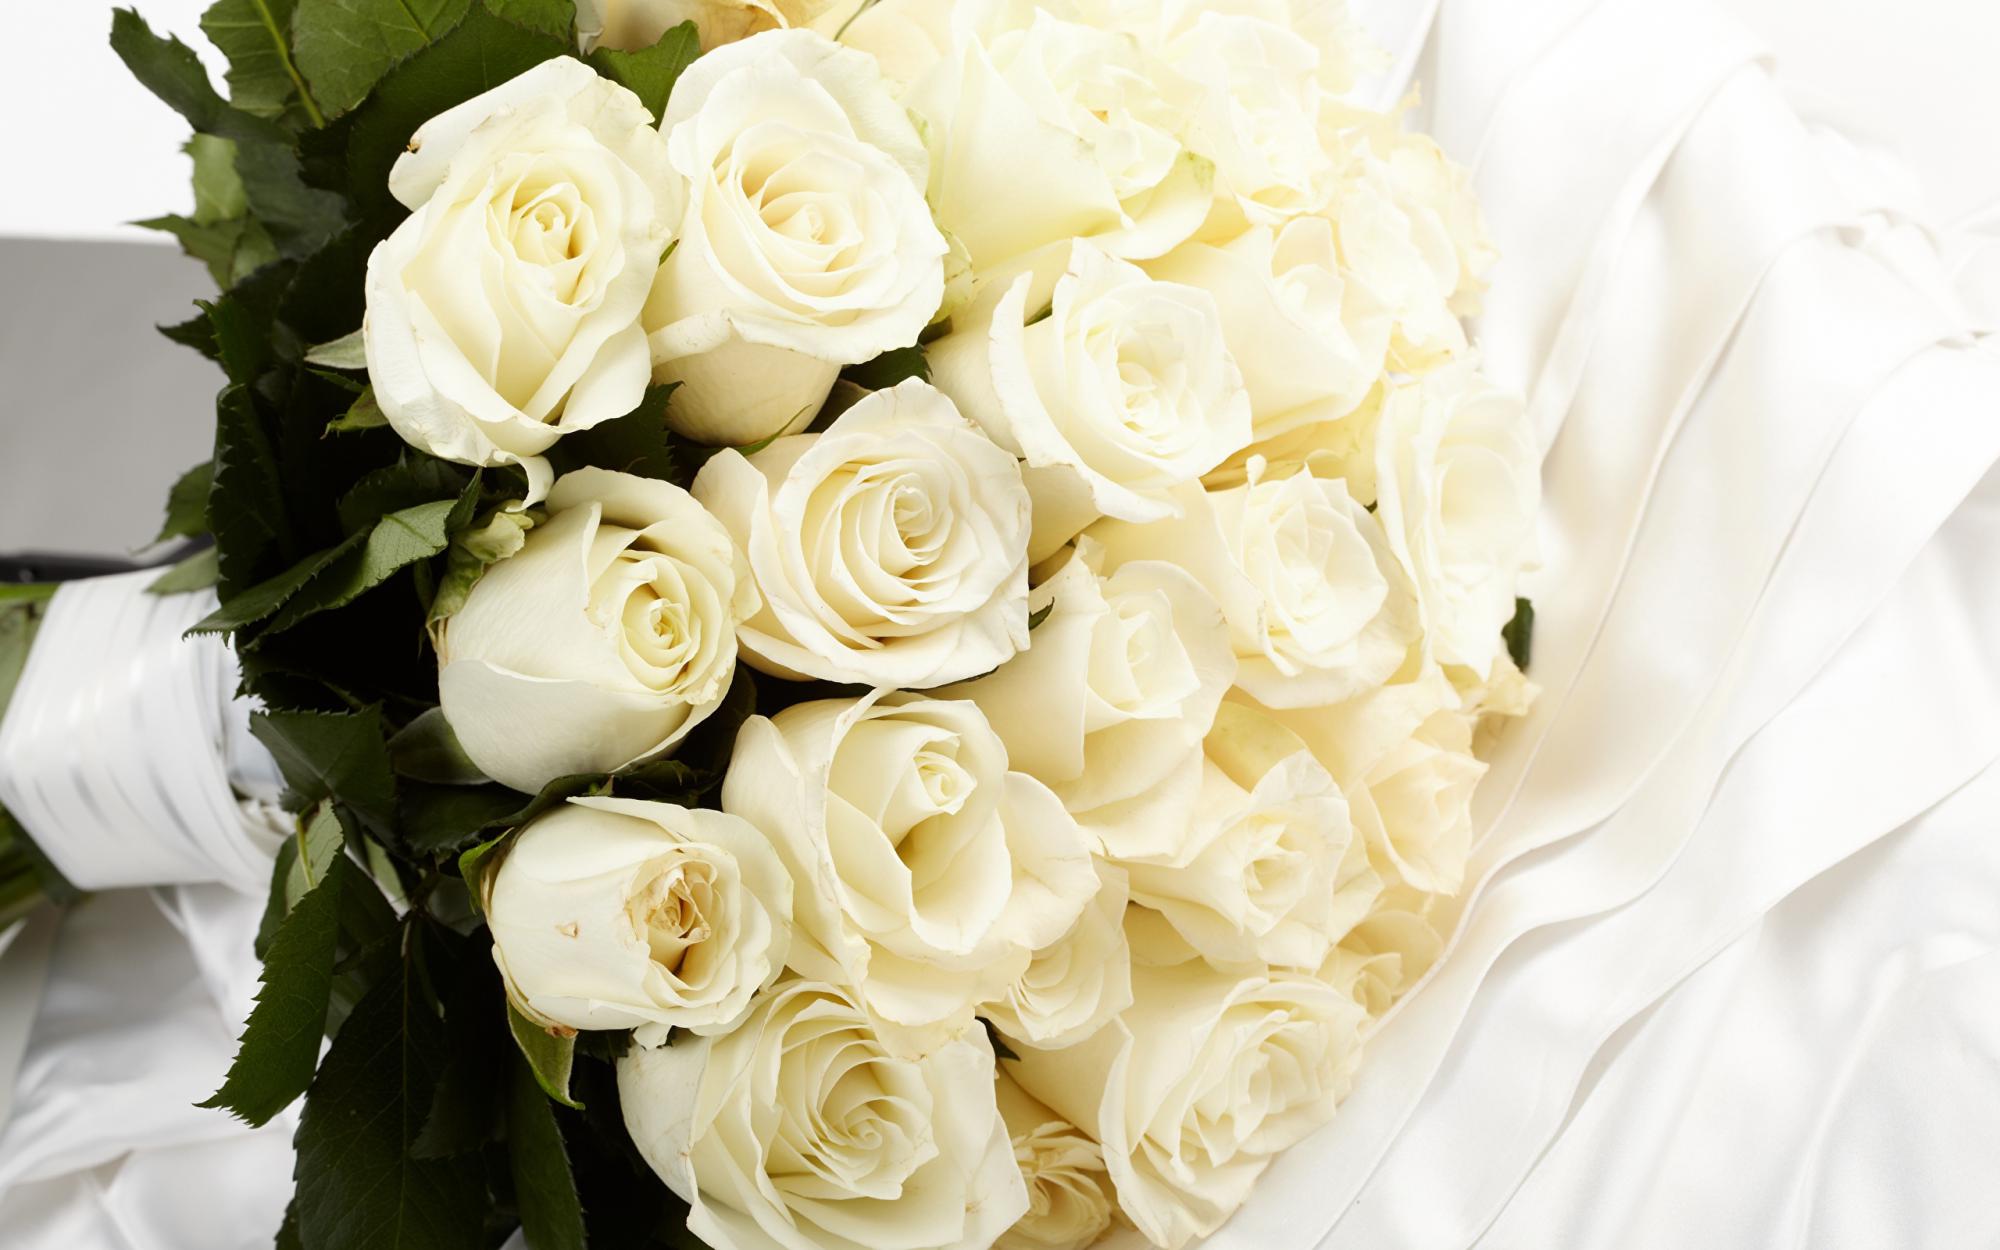 Roses_Bouquets_White_536100_2560x1600.jpg